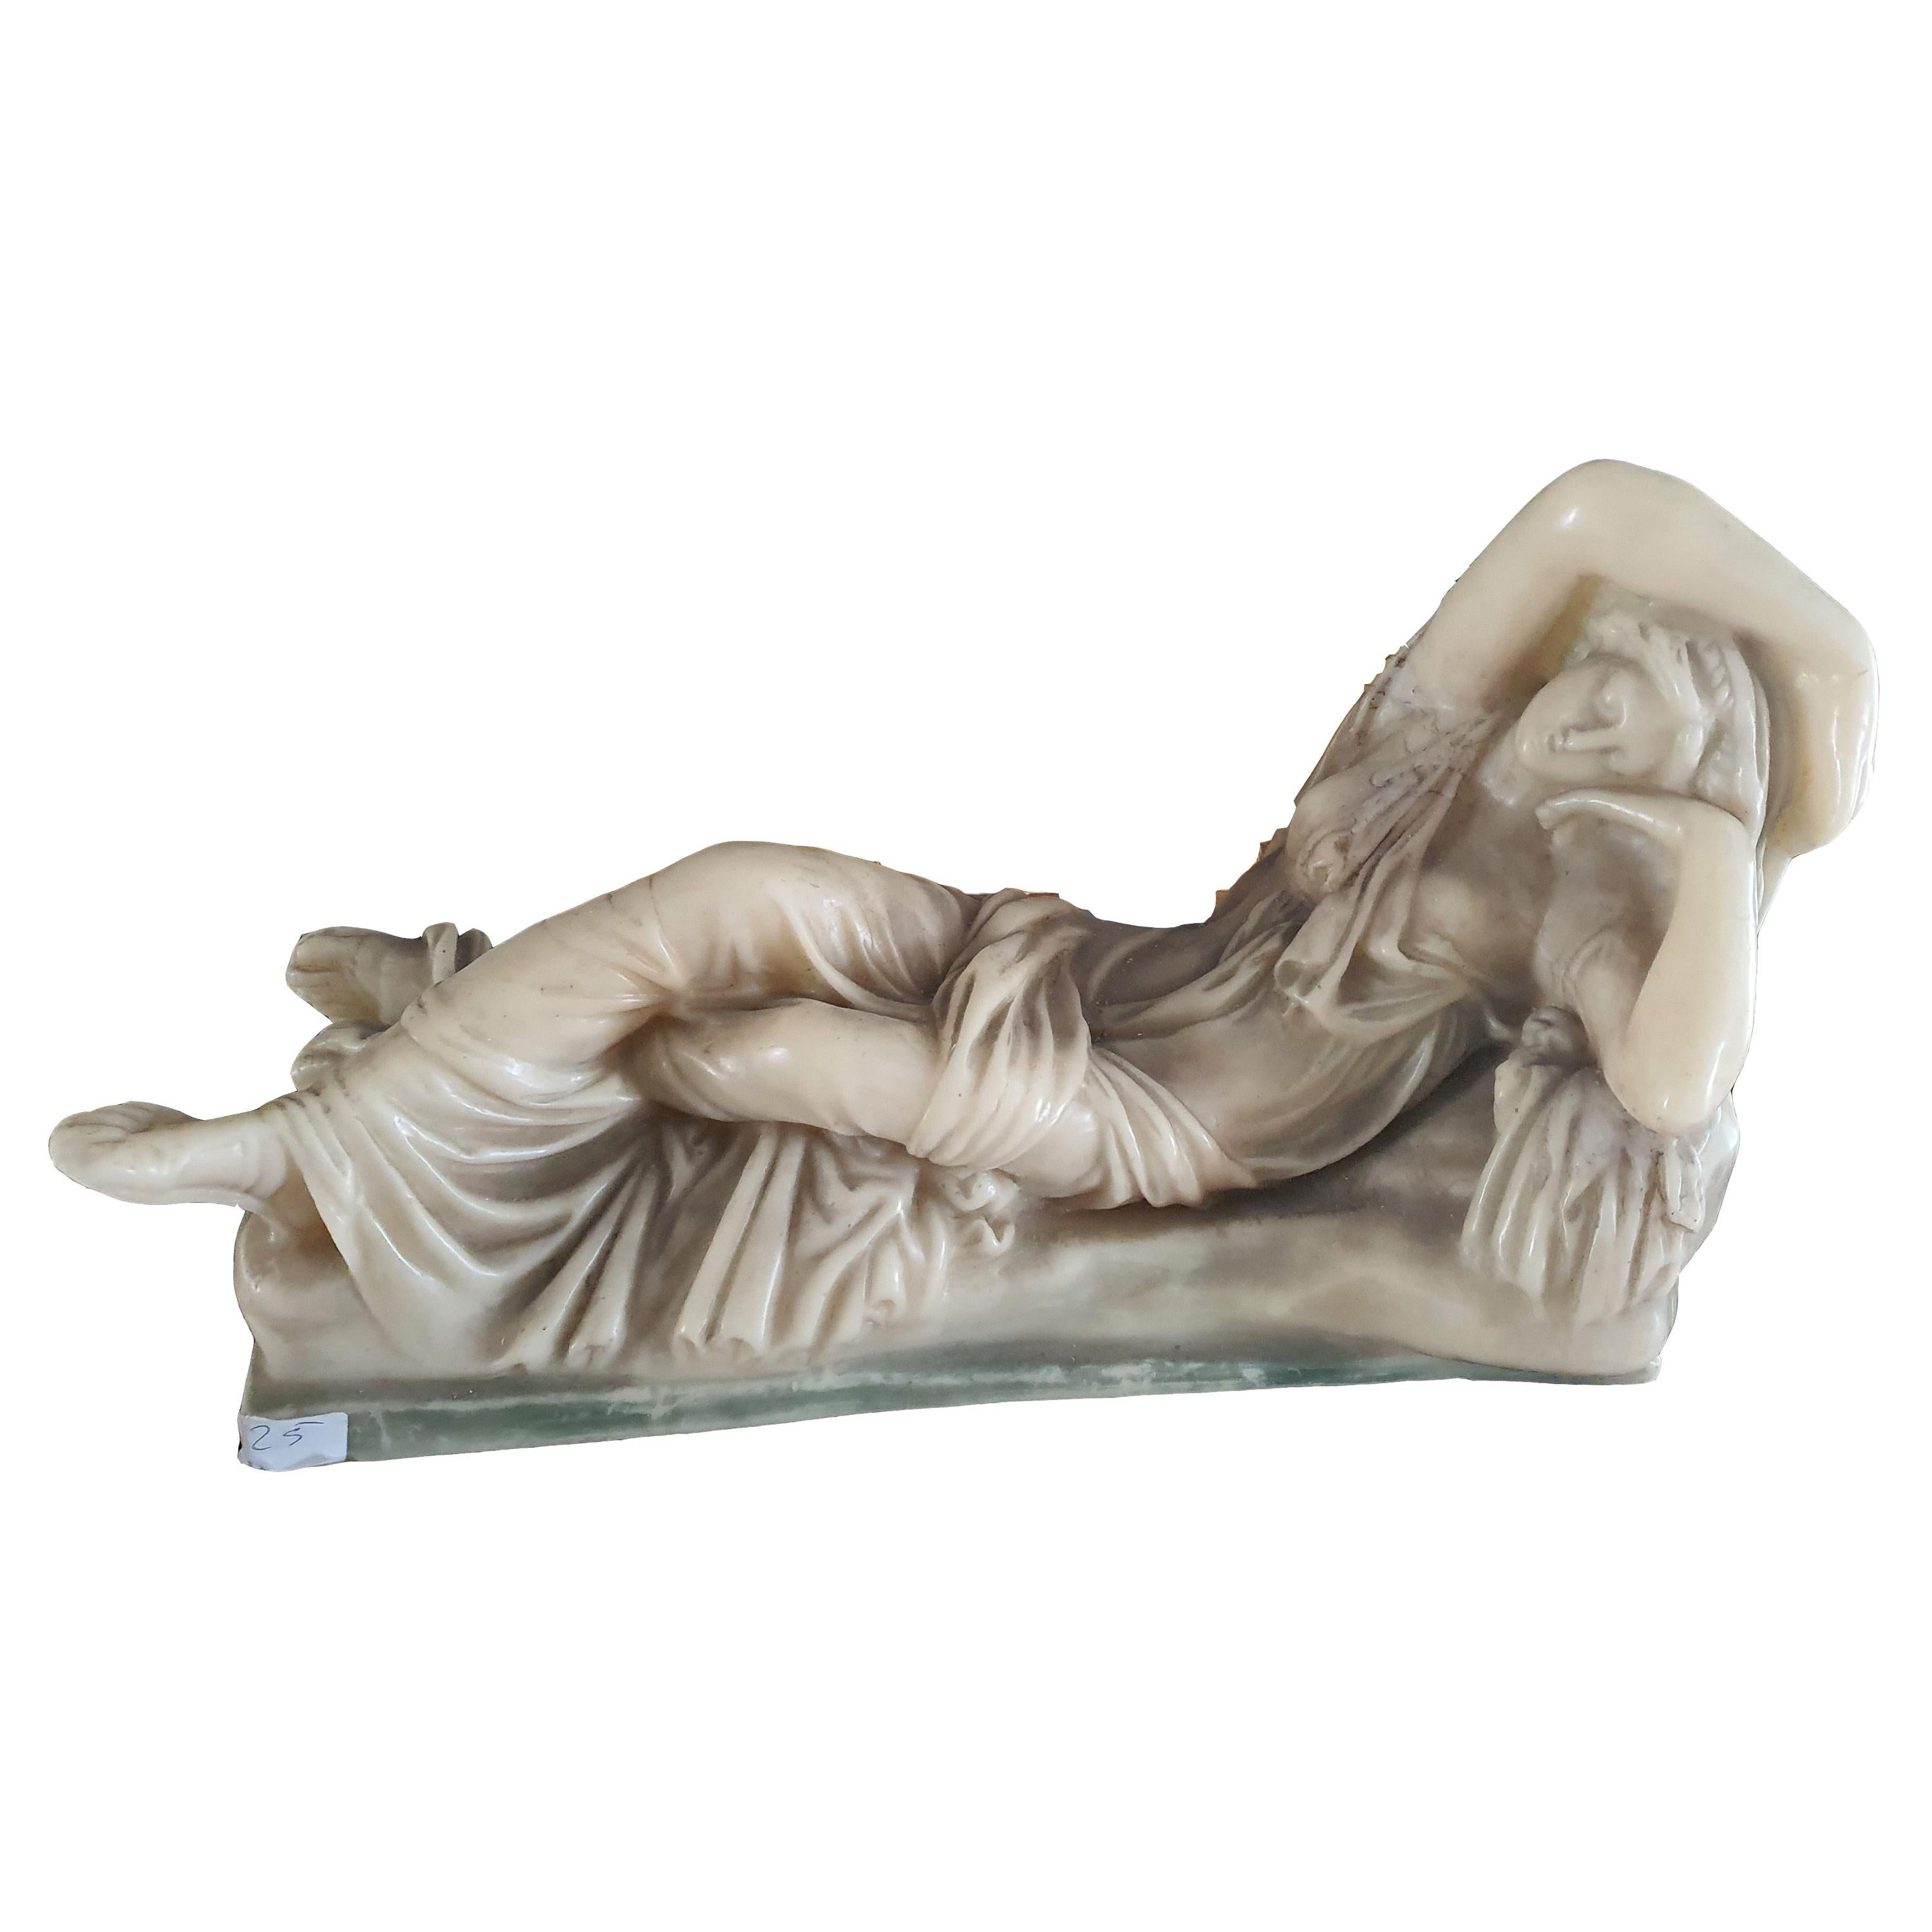 19th Century Sculpture Made of Wax Depicting Lady For Sale